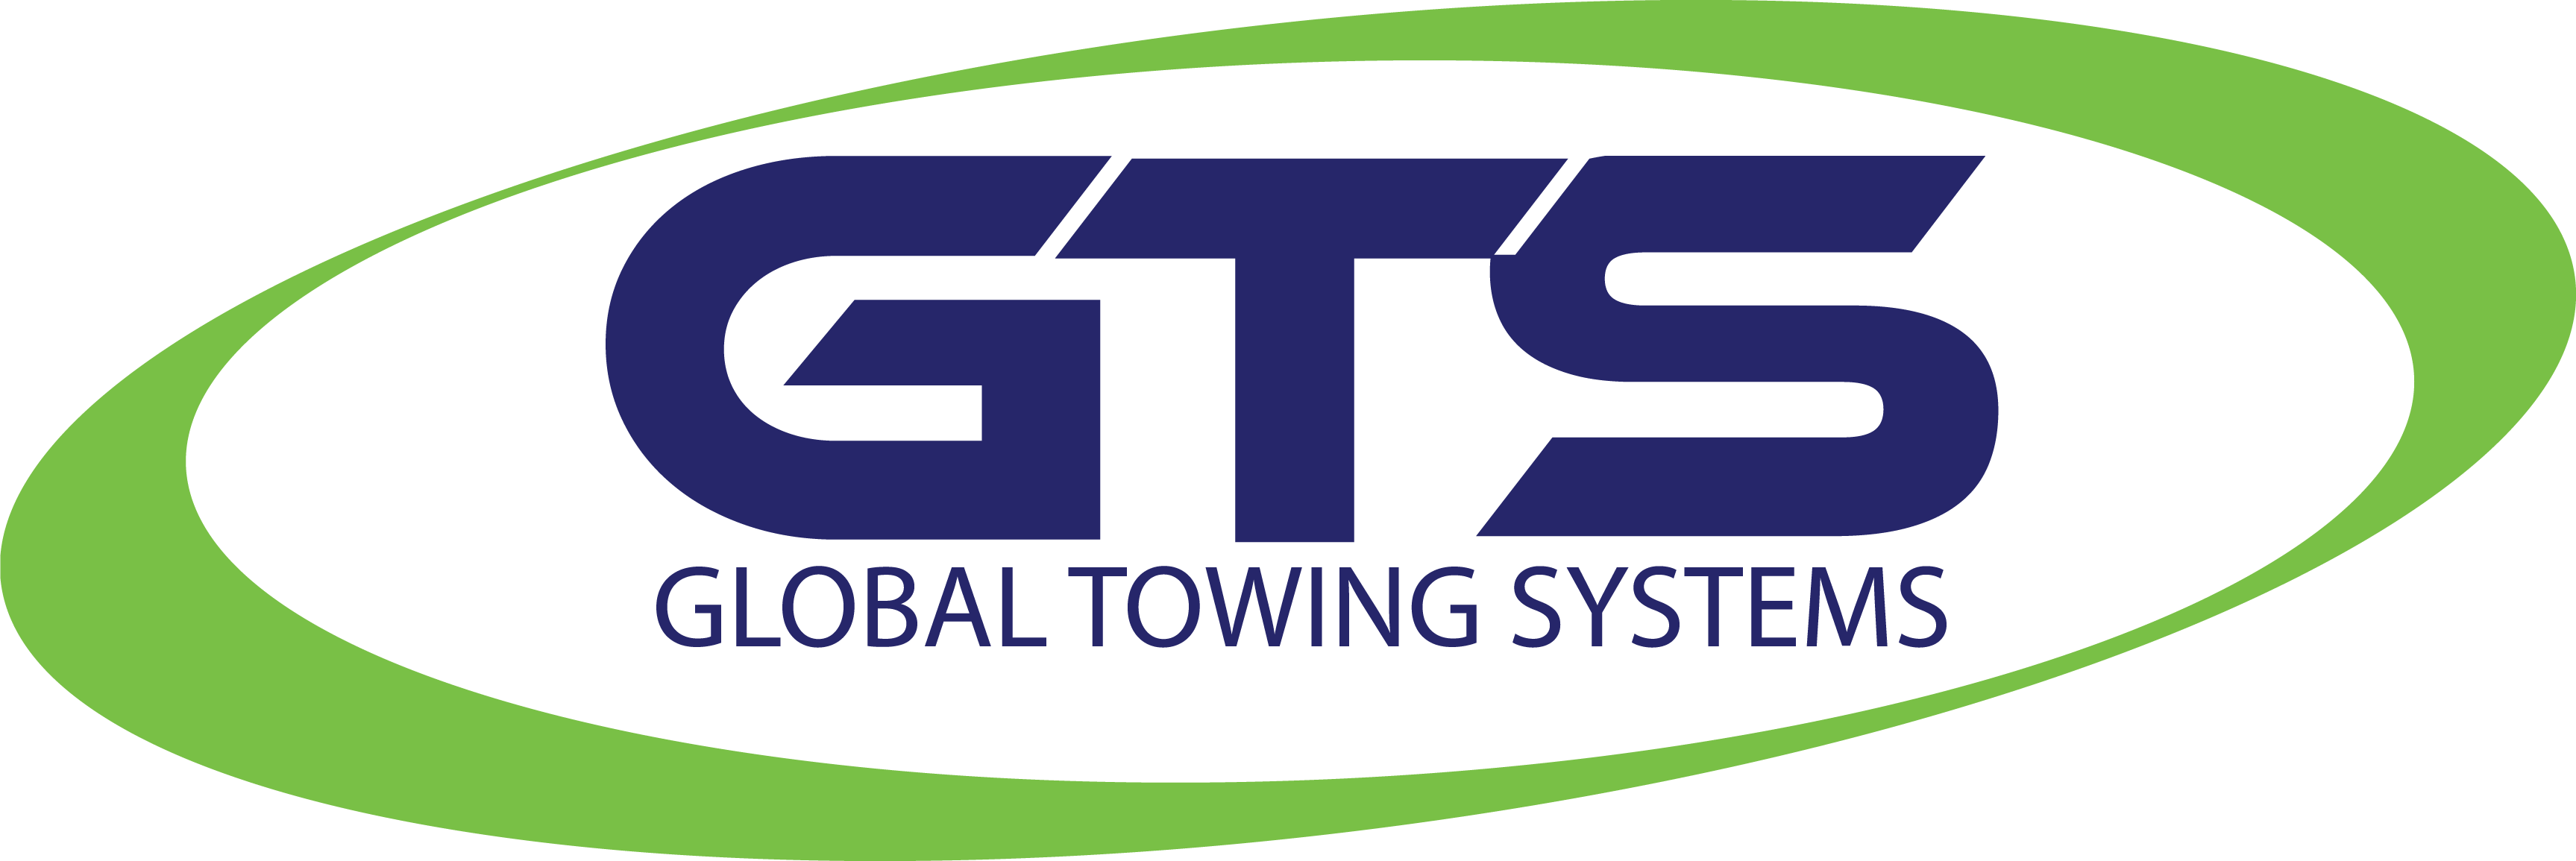 Global Towing Systems